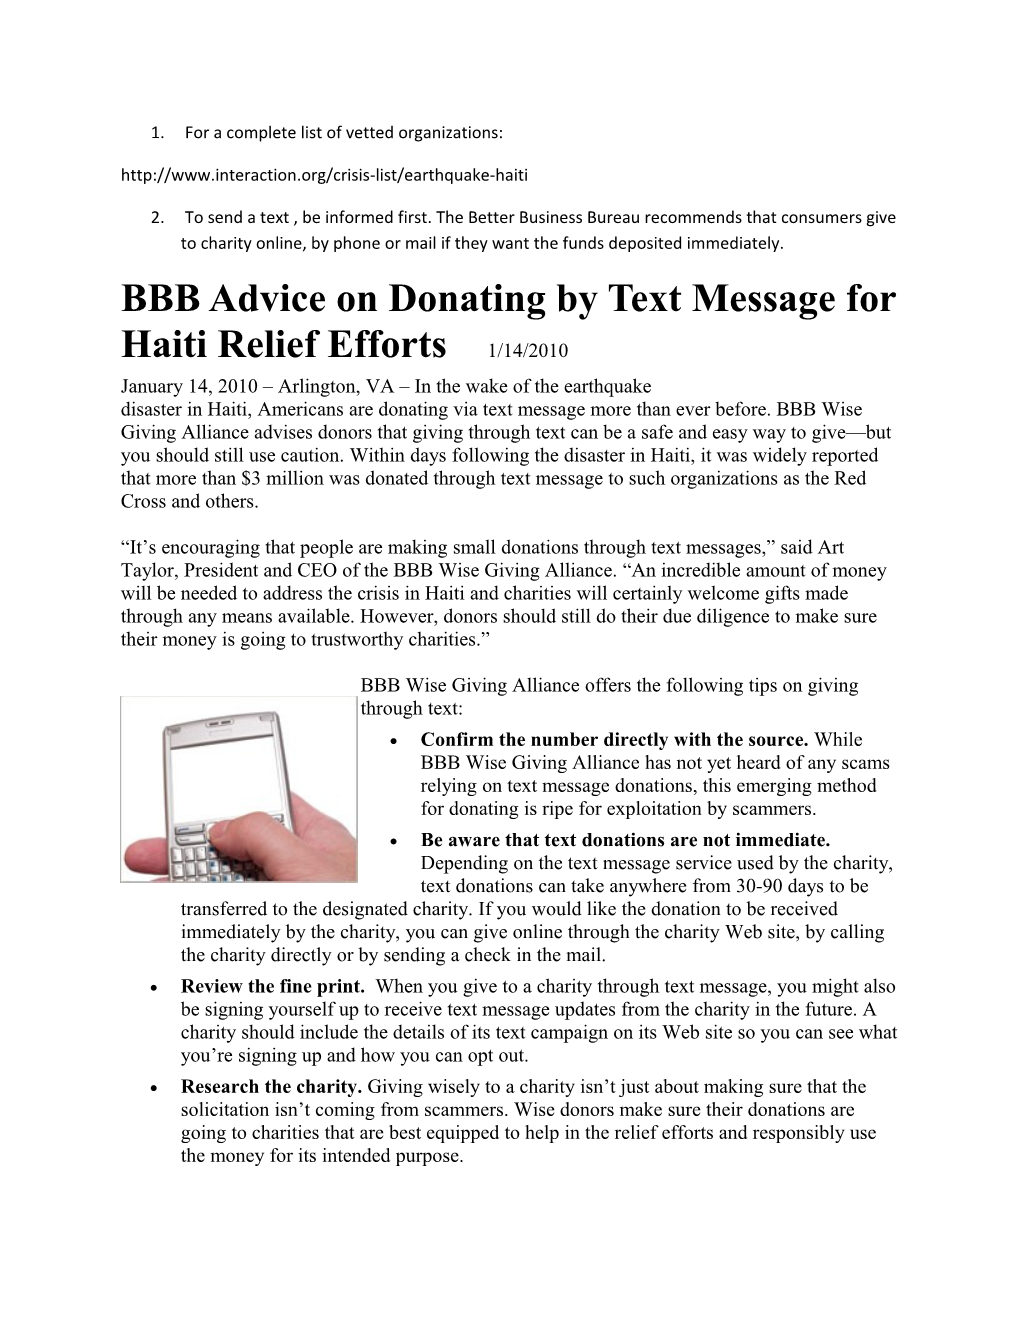 BBB Advice on Donating by Text Message for Haiti Relief Efforts 1/14/2010